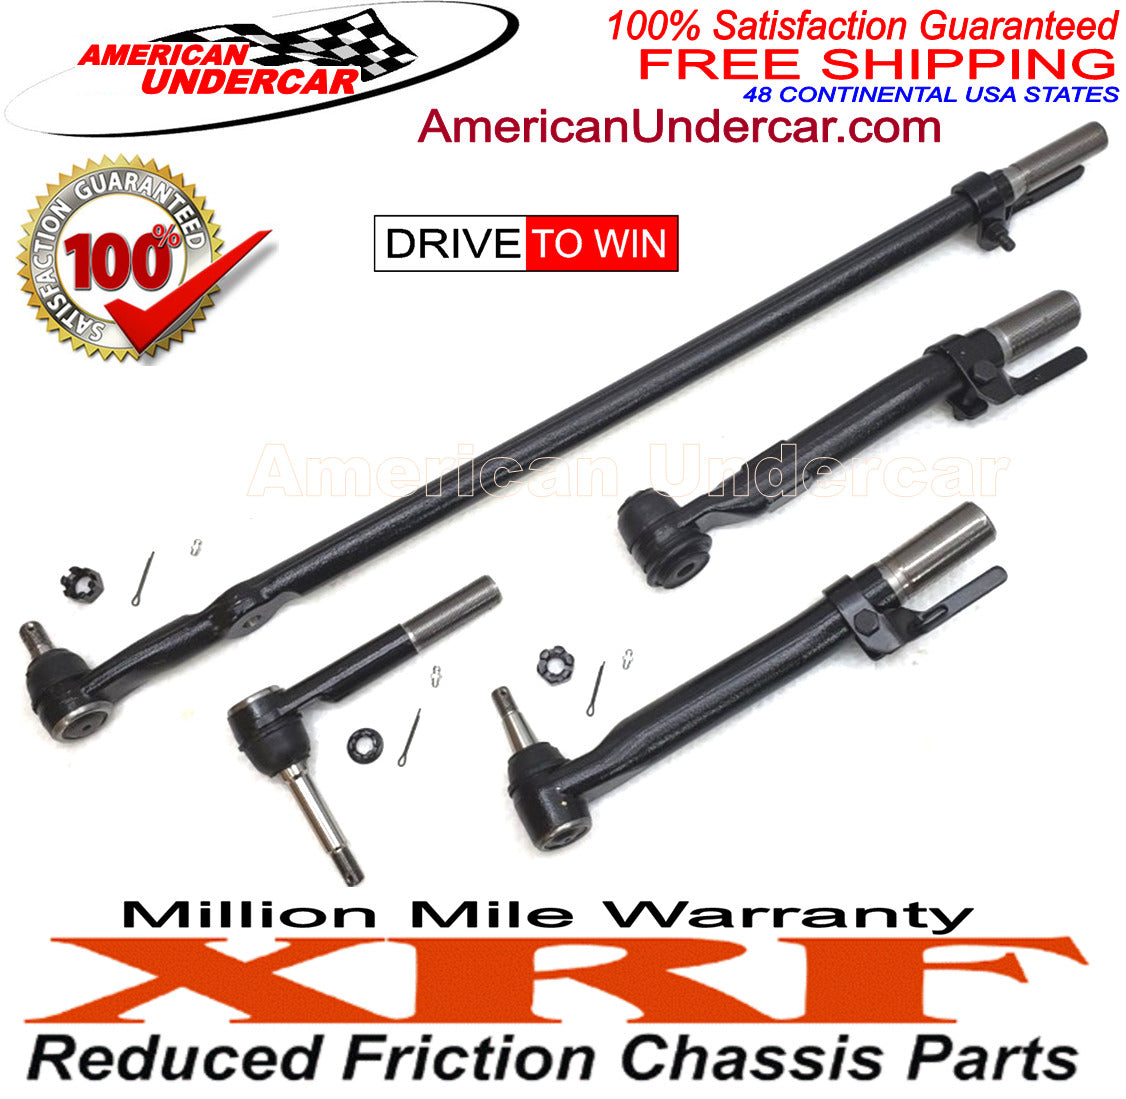 XRF Drag Link Tie Rod Steering Kit for 2005-2007 Ford F250, F350 Super Duty 4x4